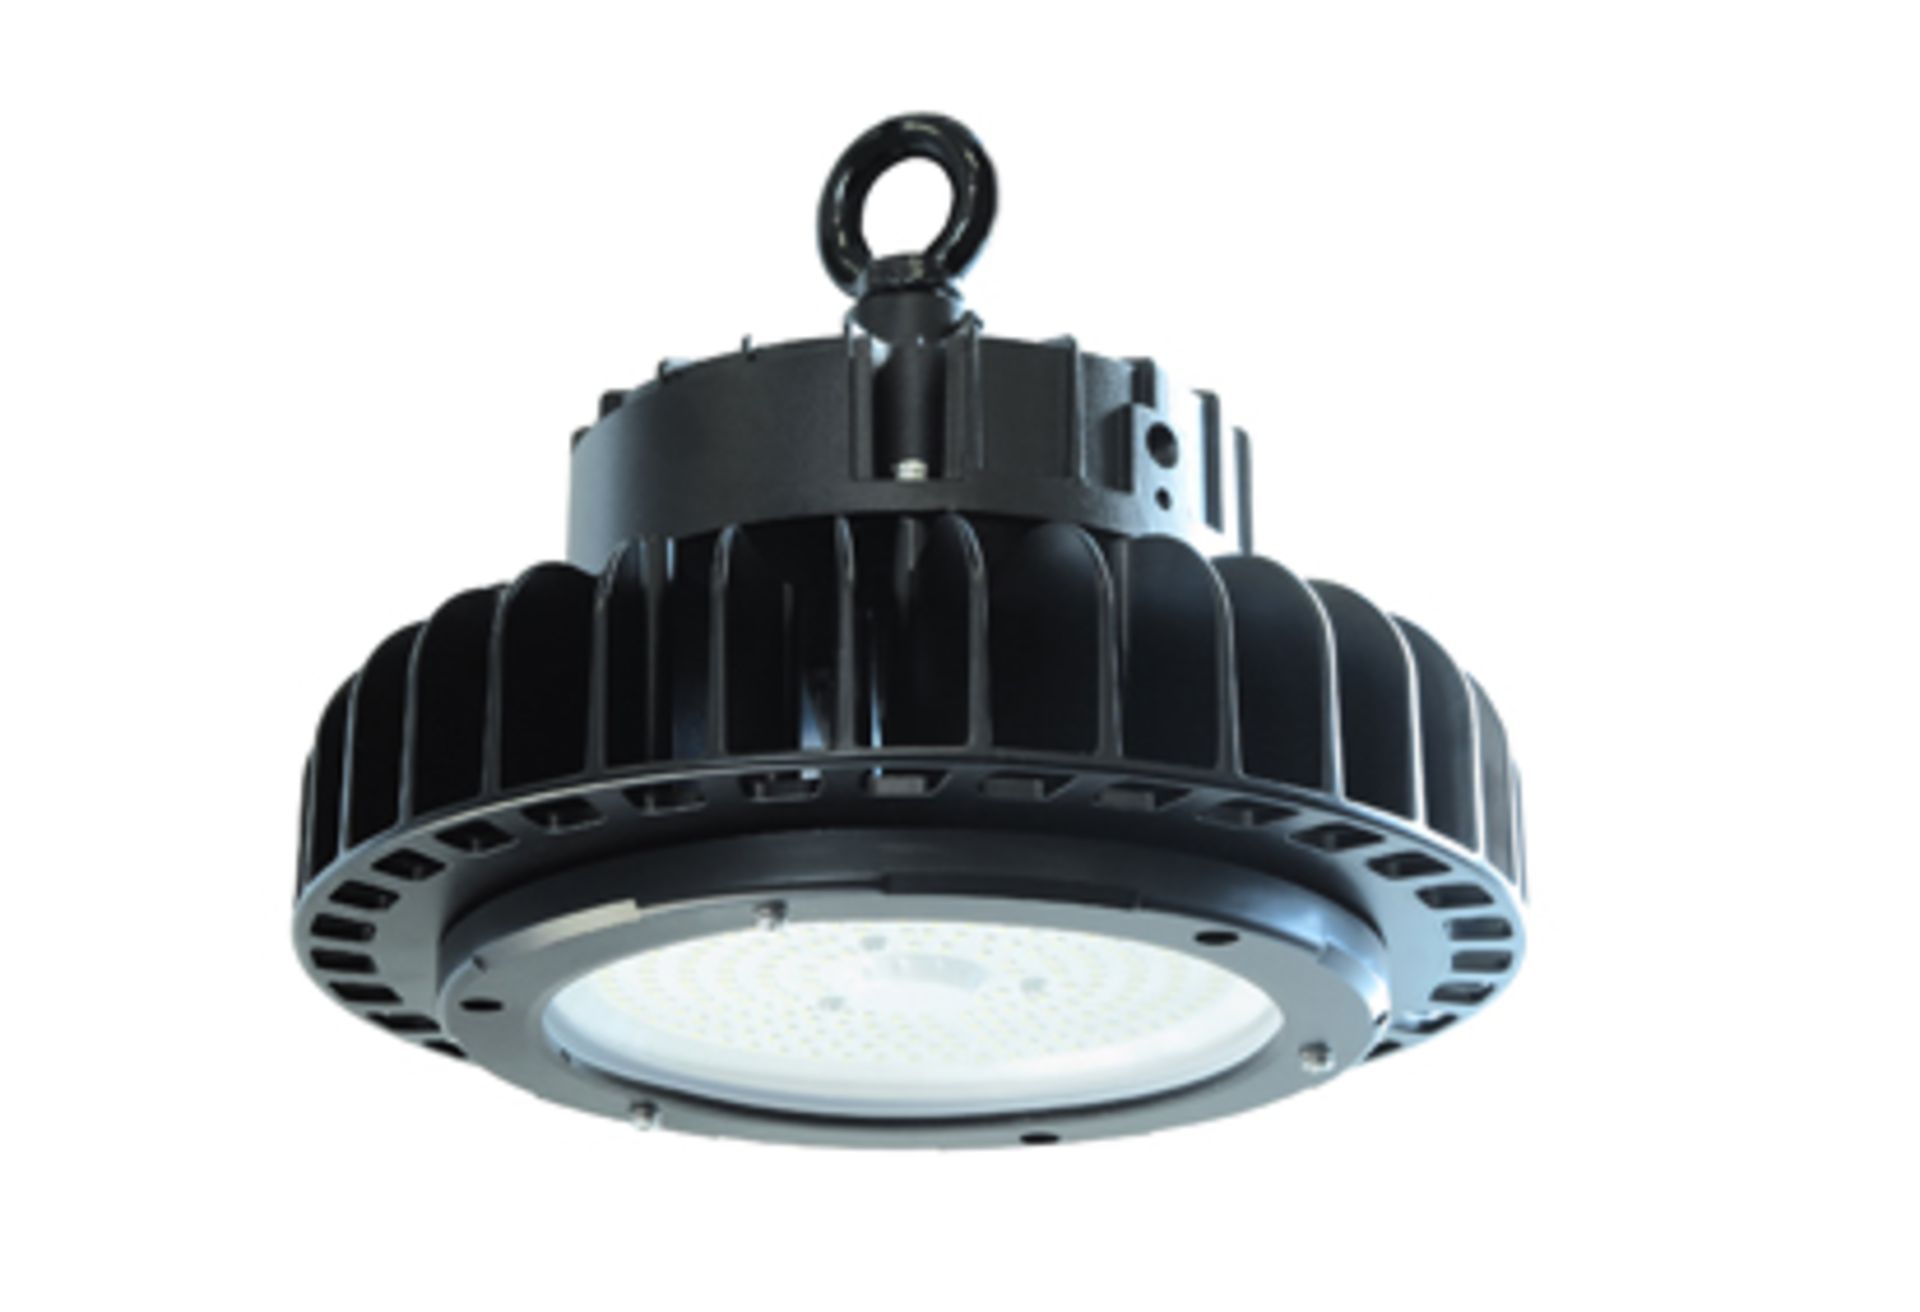 1 23000LM High Bay Light, product code TQHB23000-02 (located on mezzanine) - Image 4 of 5